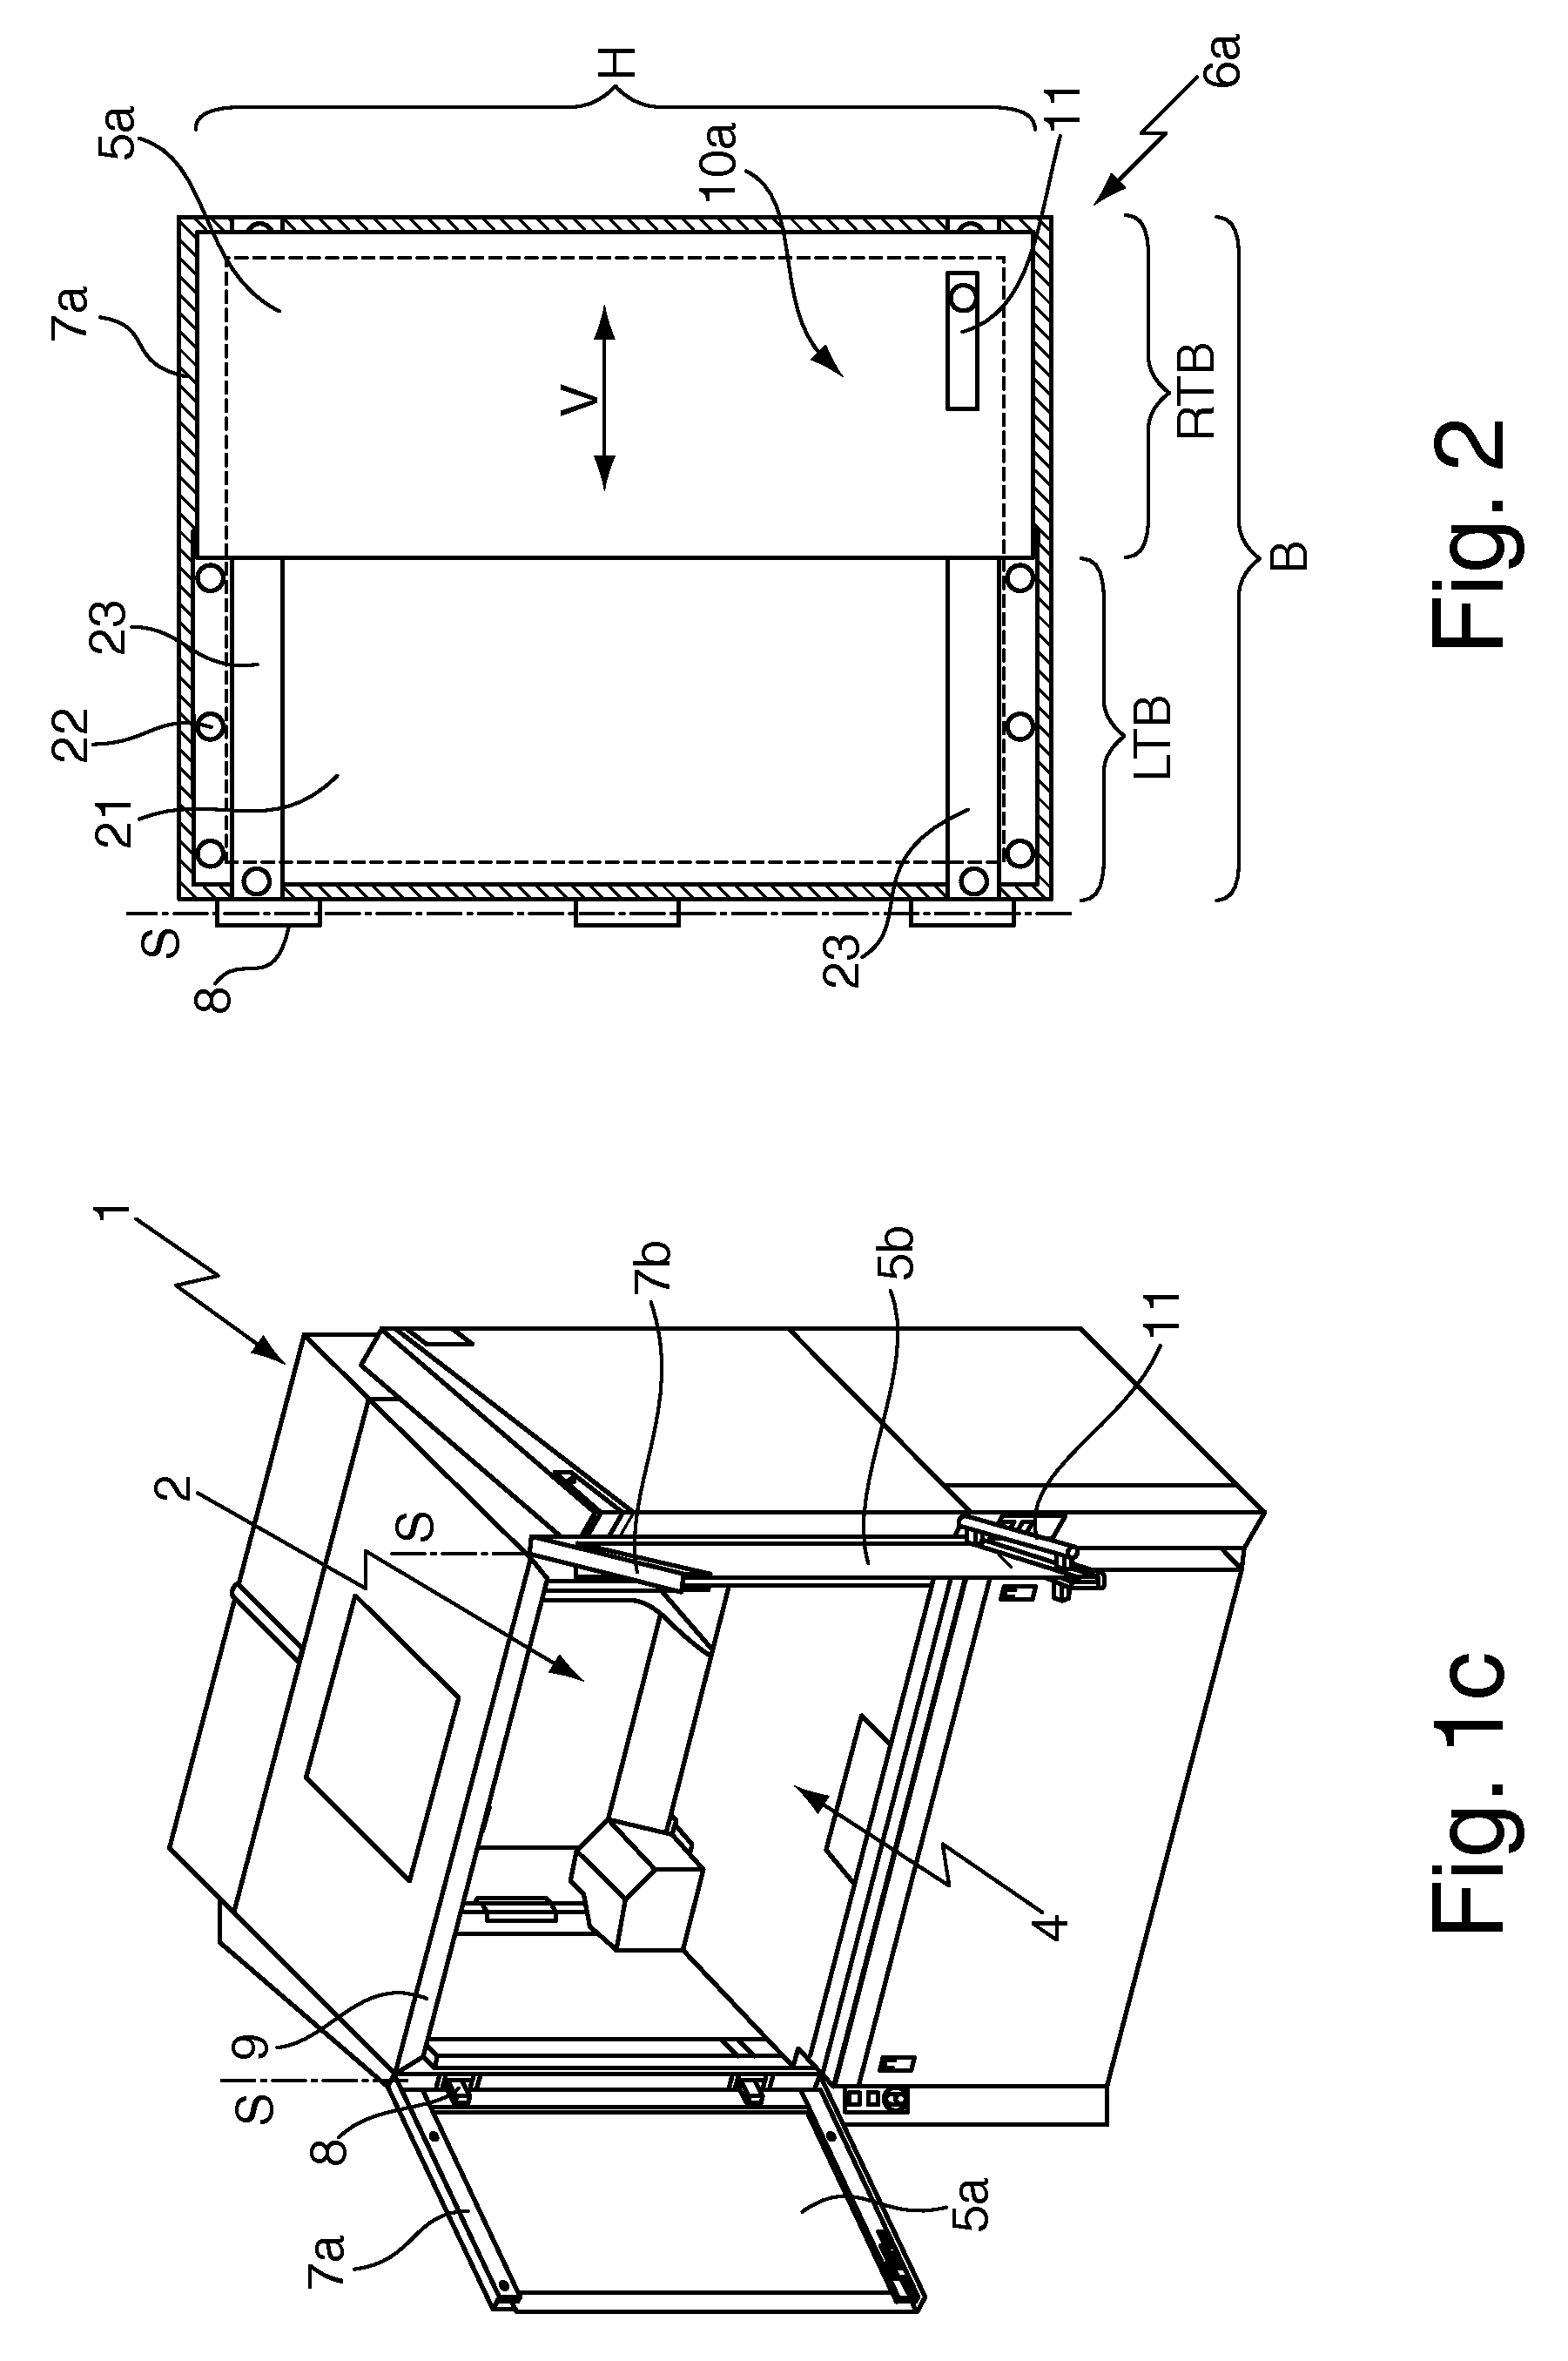 Door configuration with a pivoting door and sliding door function which can be actuated by a single actuating element